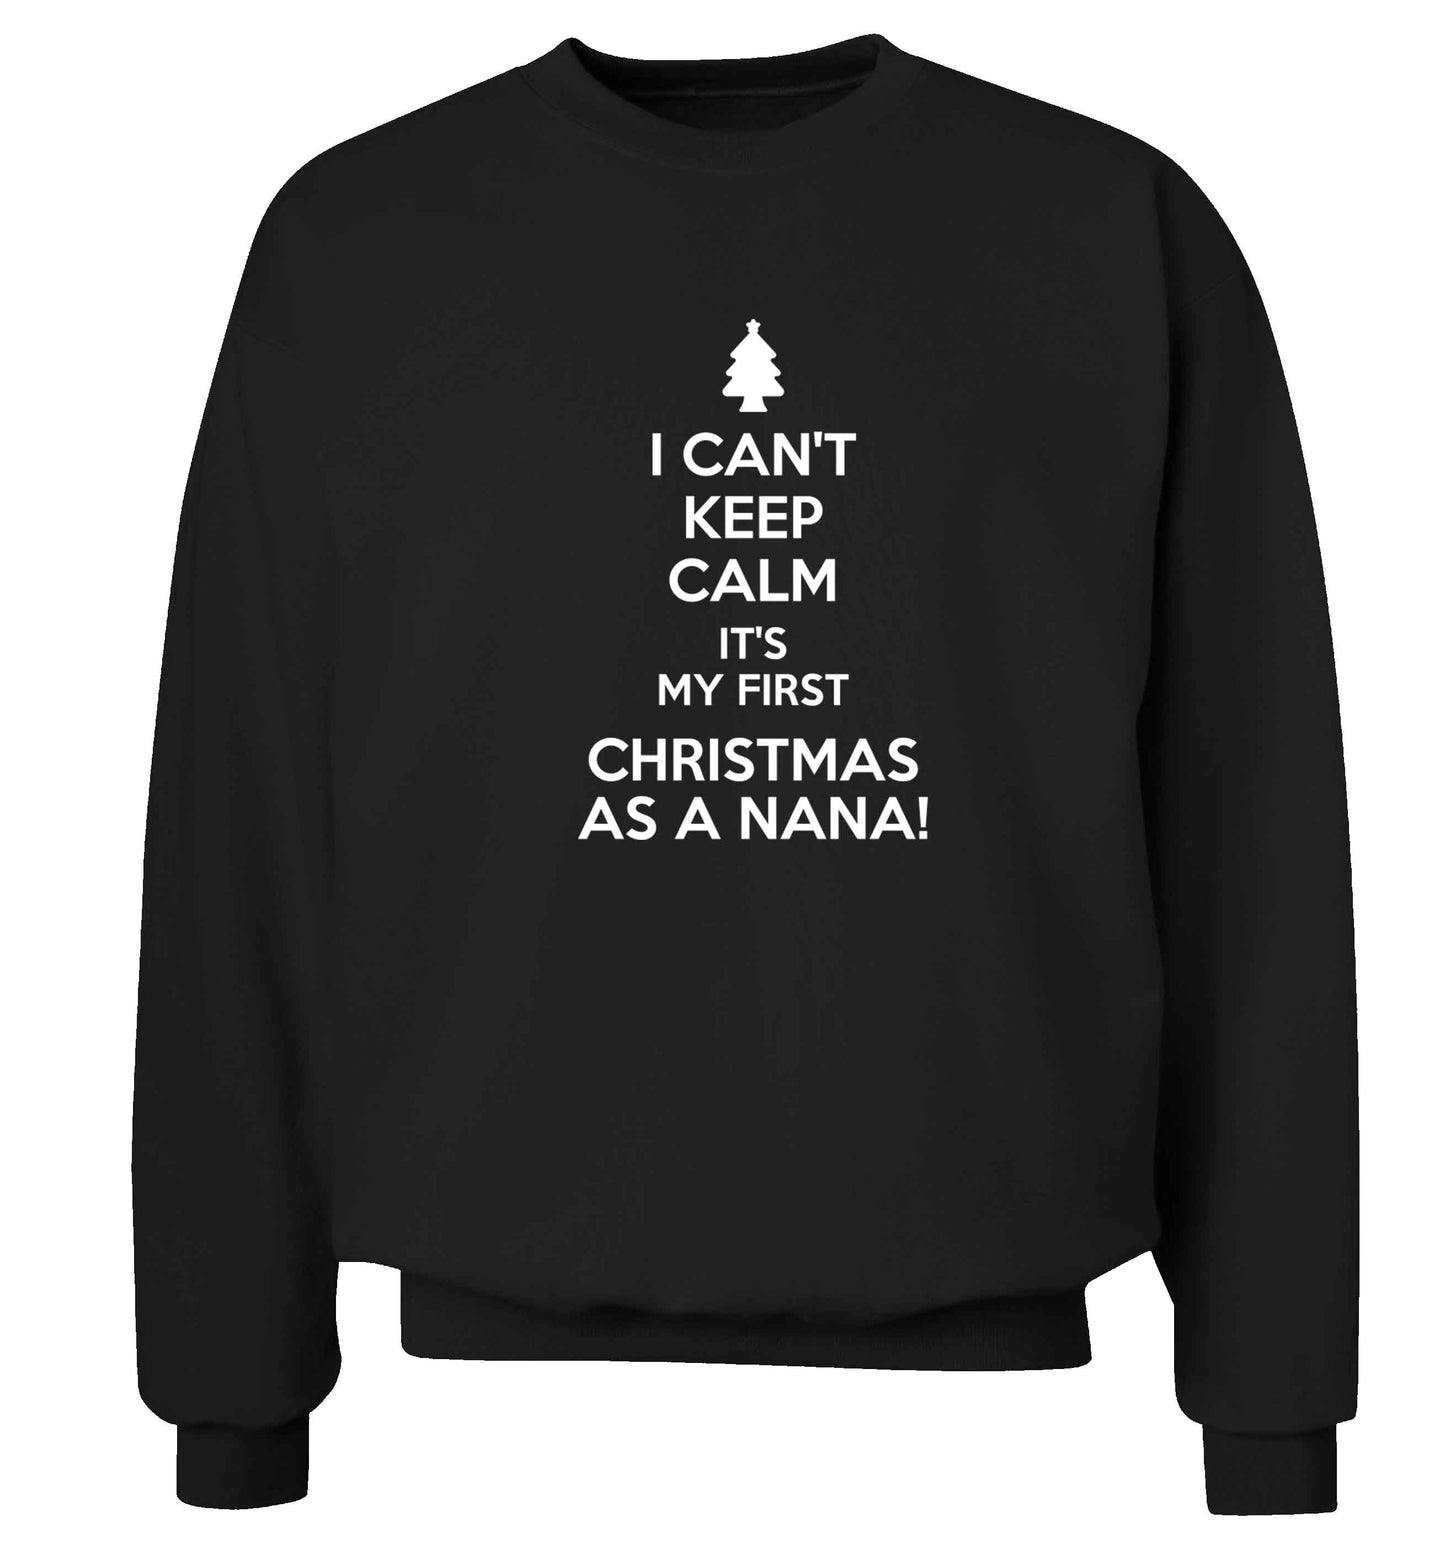 I can't keep calm it's my first Christmas as a nana! Adult's unisex black Sweater 2XL